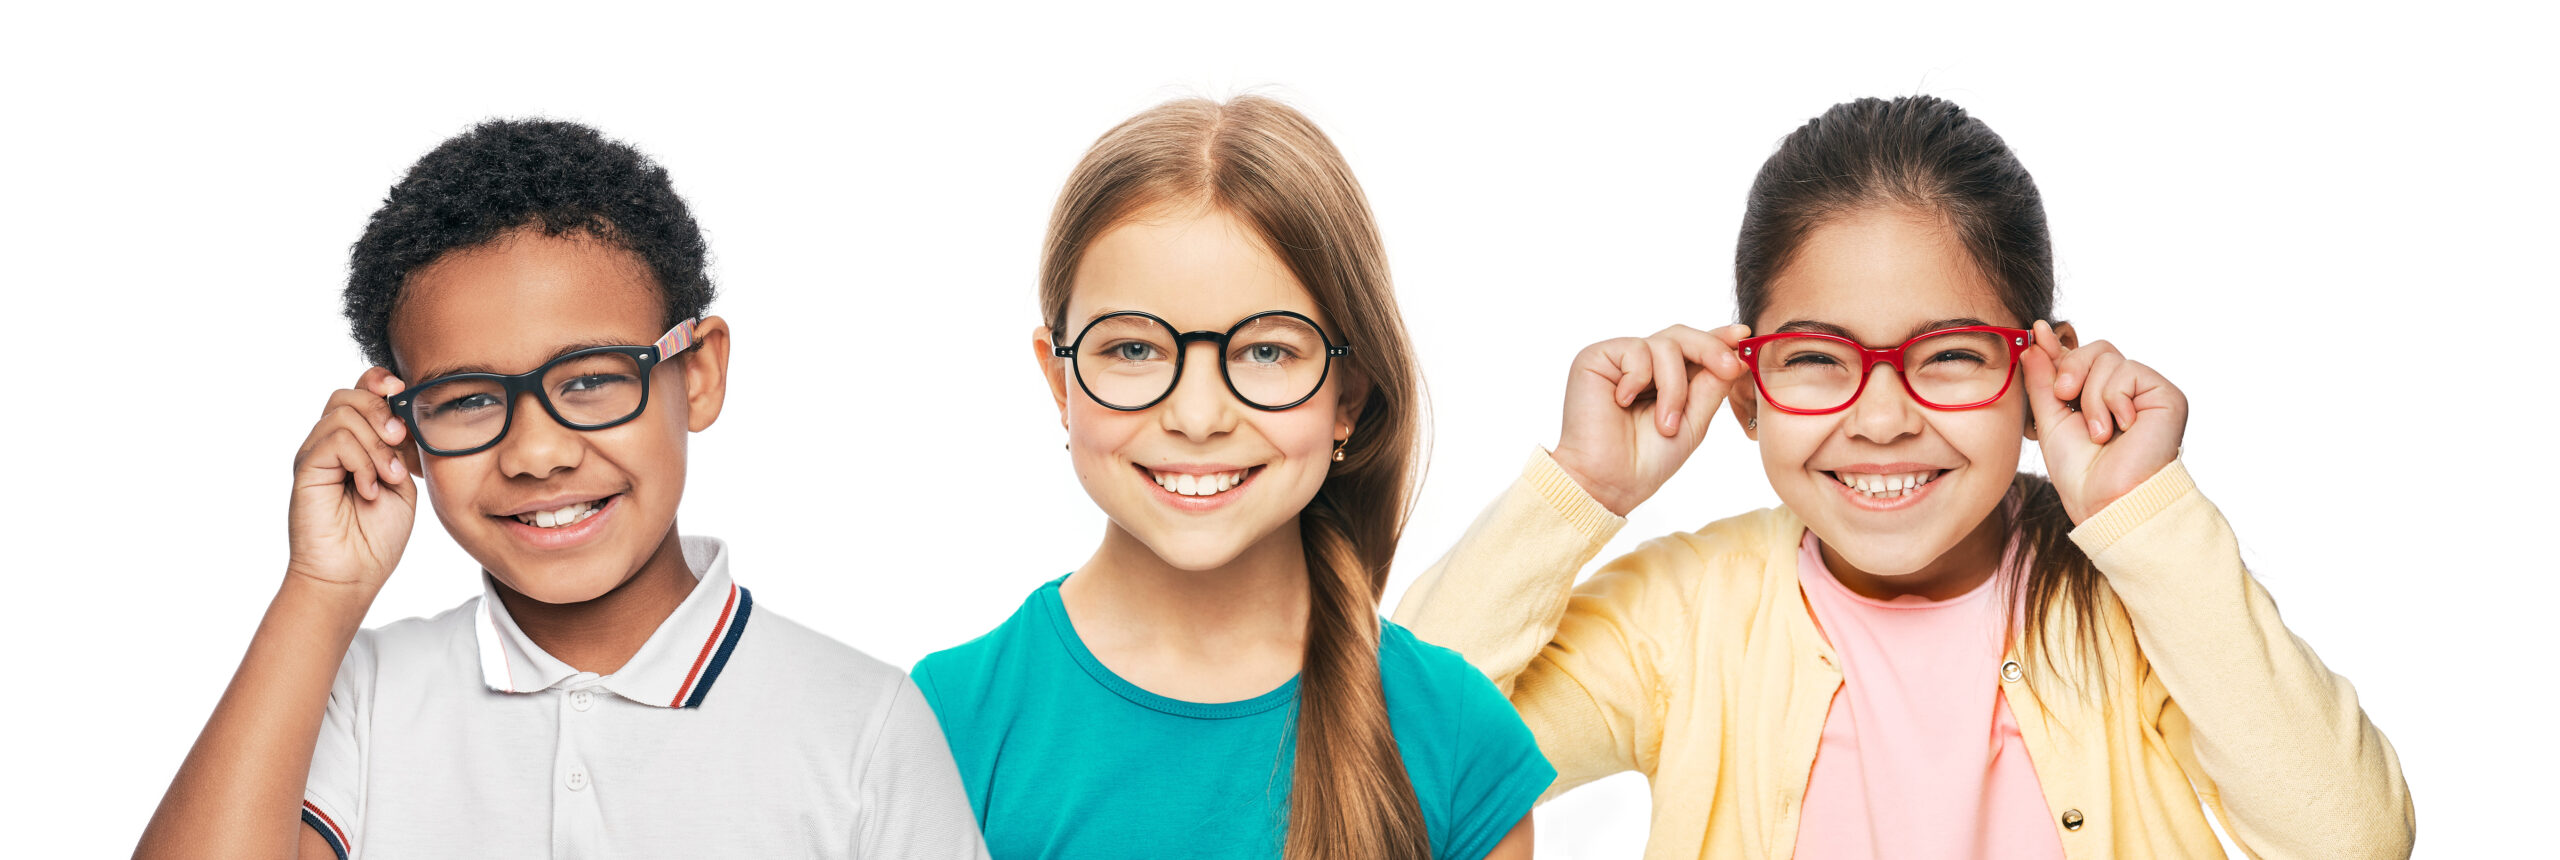 Make A Gift. About this photo: Group of smiling multiethnic kids wearing modern eyeglasses on white background